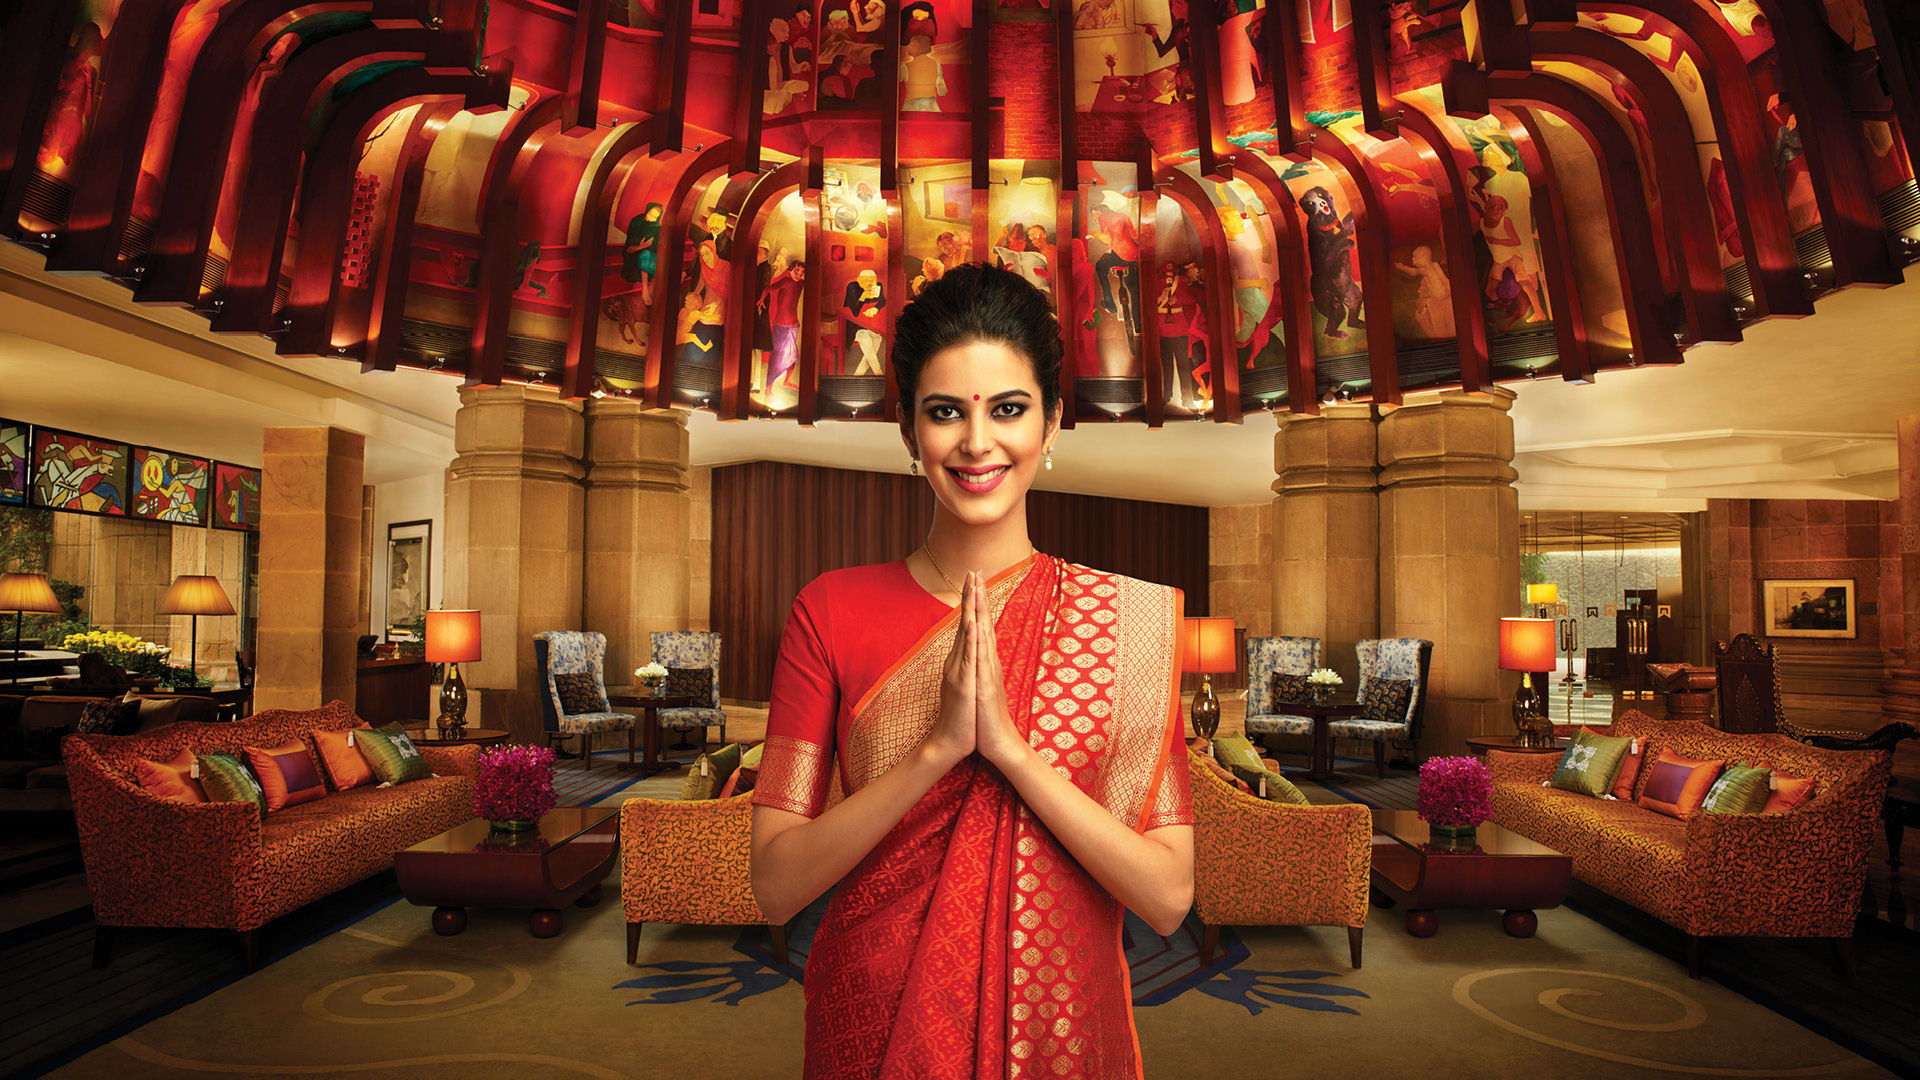 Brand New Era Of Hospitality:Here's How ITC Hotels Is Redefining The C